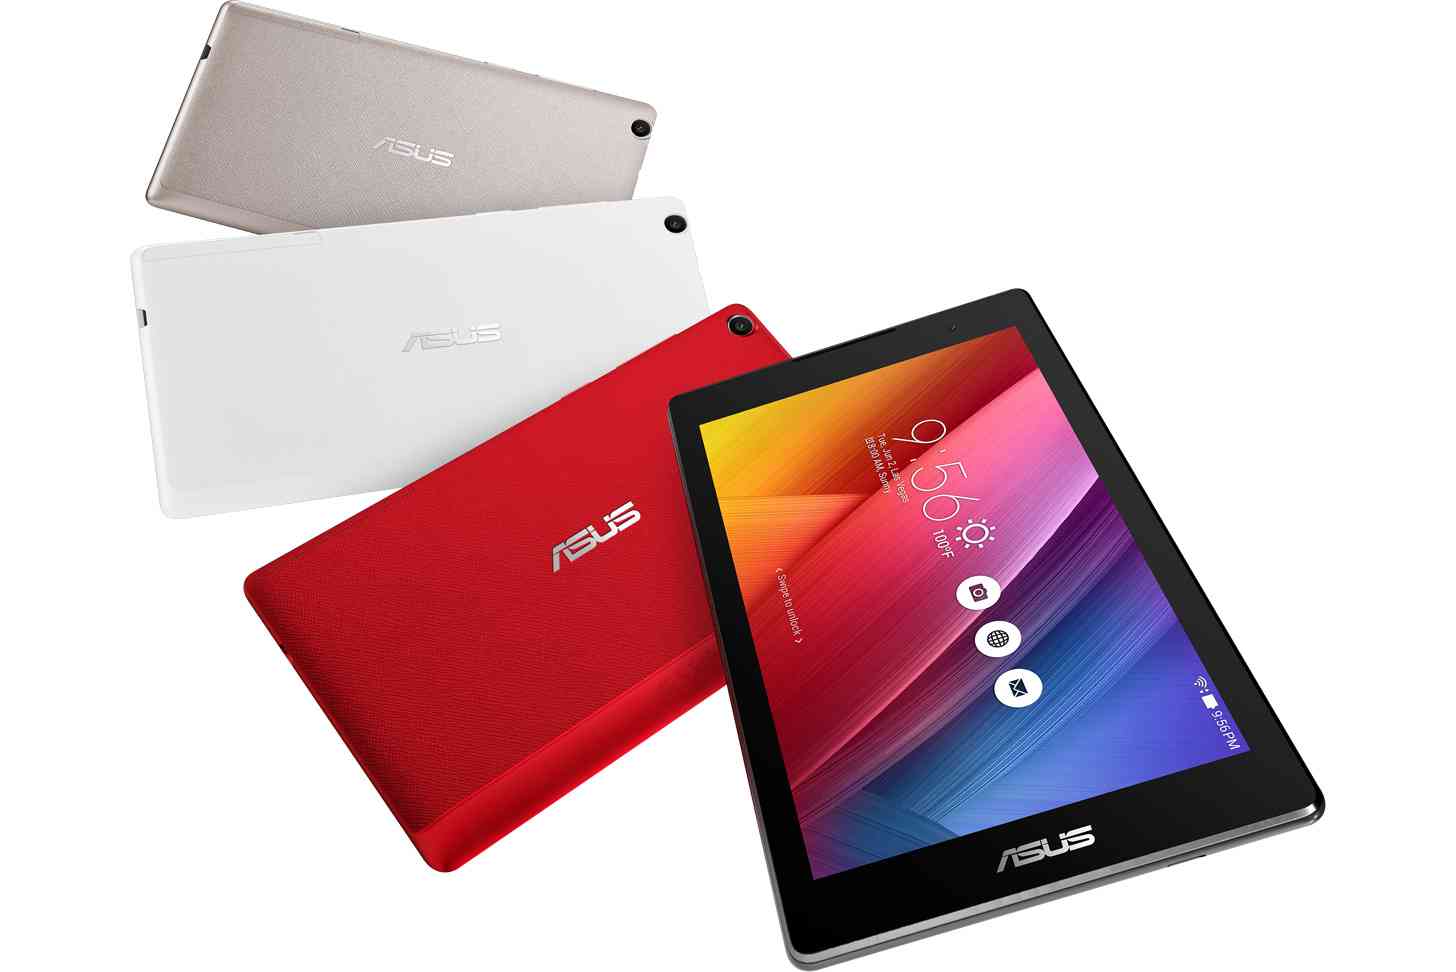 ASUS ZenPad 7.0 Android tablet